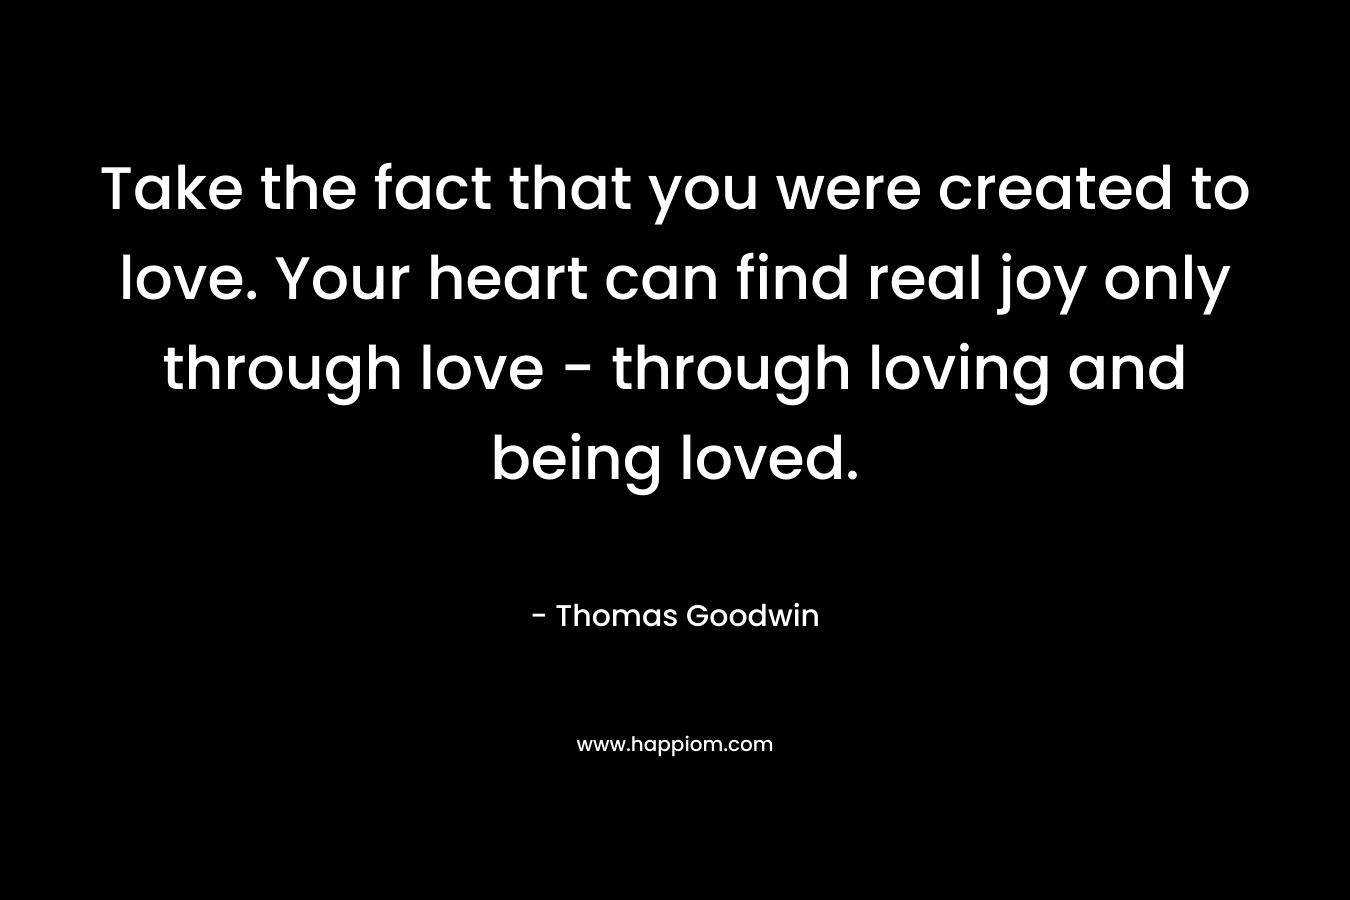 Take the fact that you were created to love. Your heart can find real joy only through love – through loving and being loved. – Thomas Goodwin